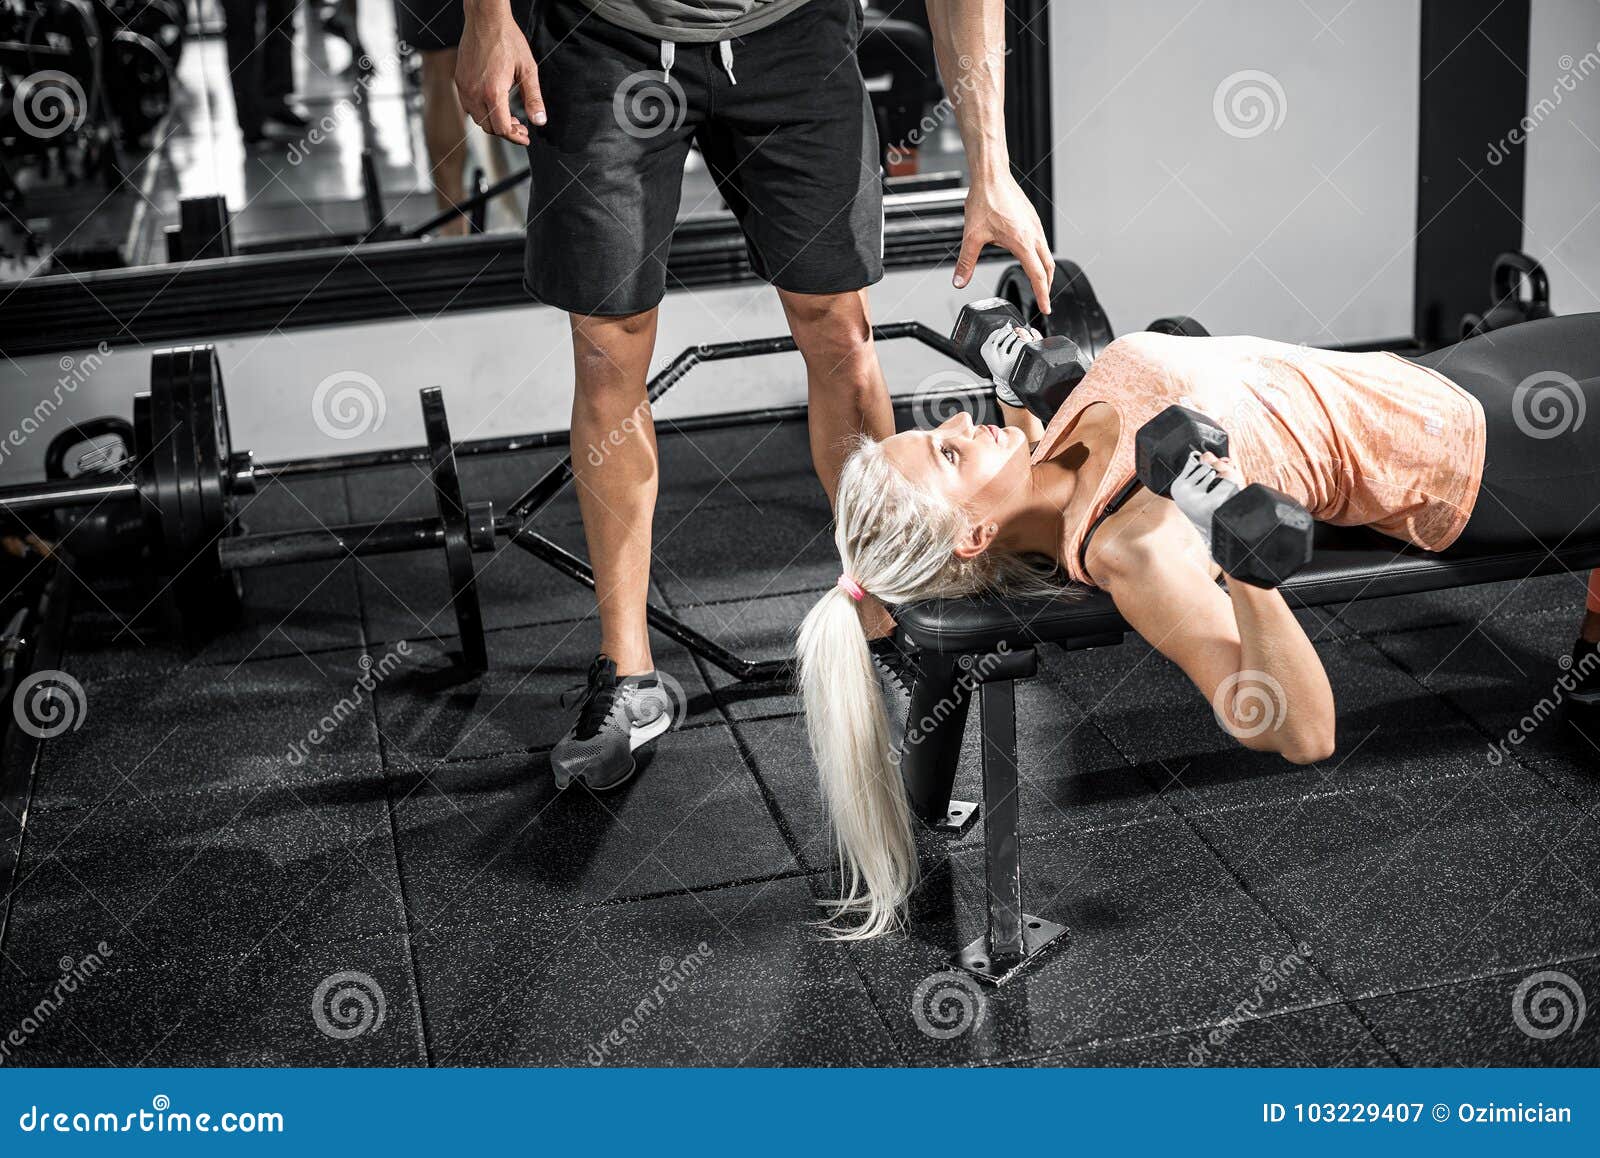 Female Dumbbell Chest Press with Help of Personal Trainer Stock